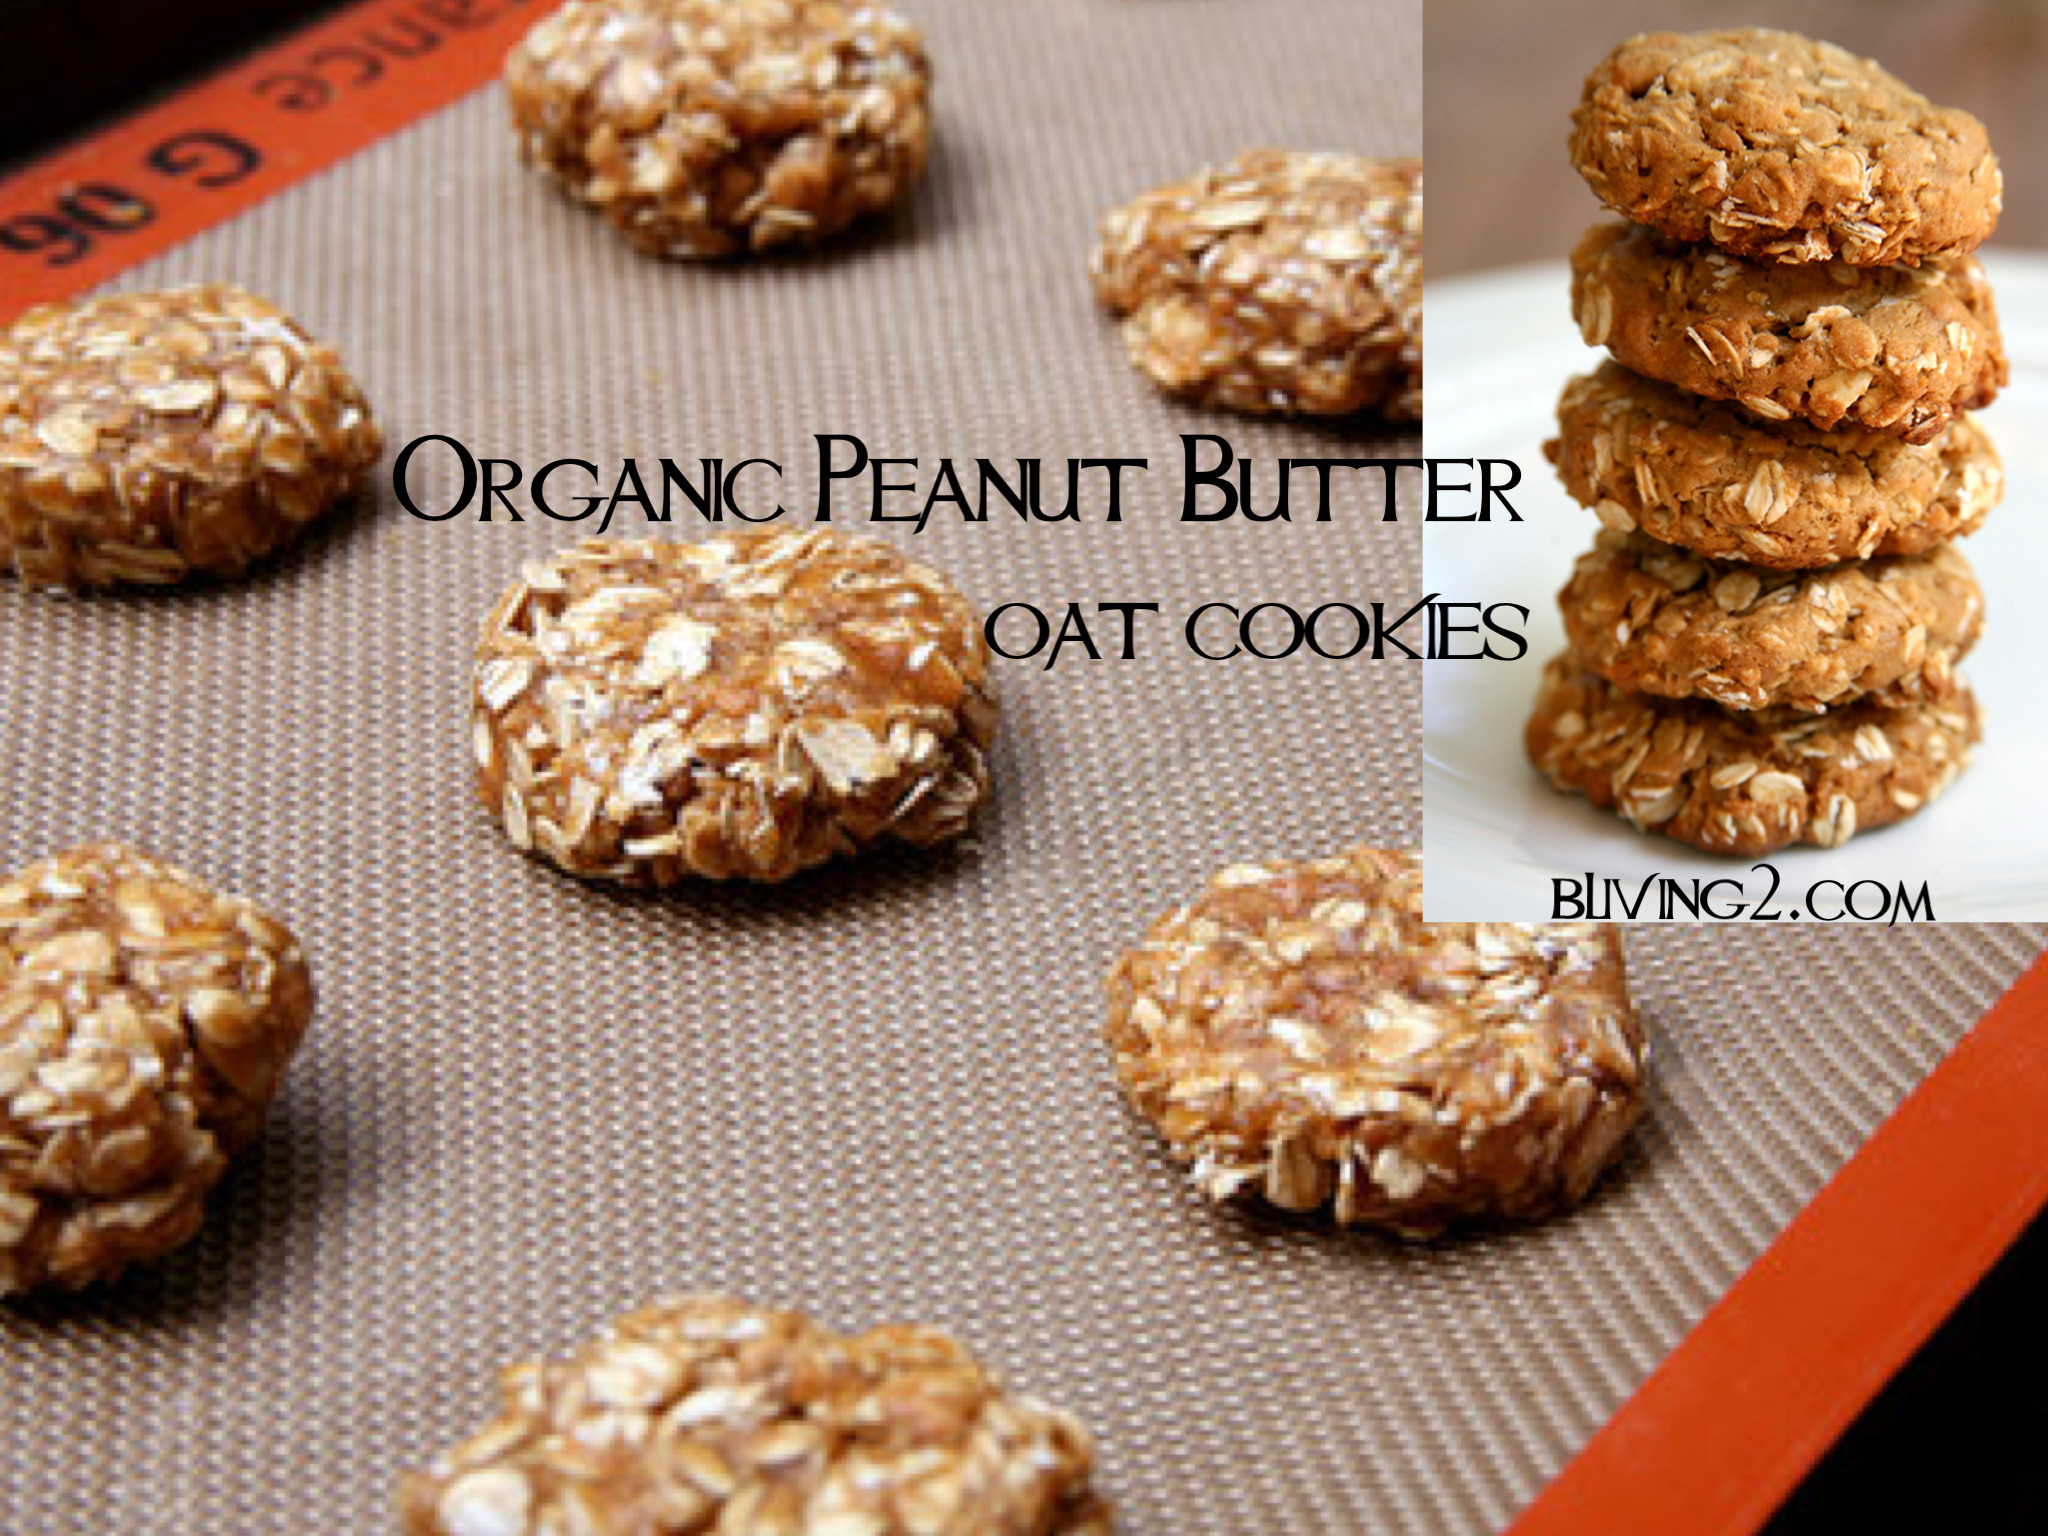 Organic Peanut butter Cookies 20 Of the Best Ideas for organic Peanut butter Oat Cookies – Bliving2